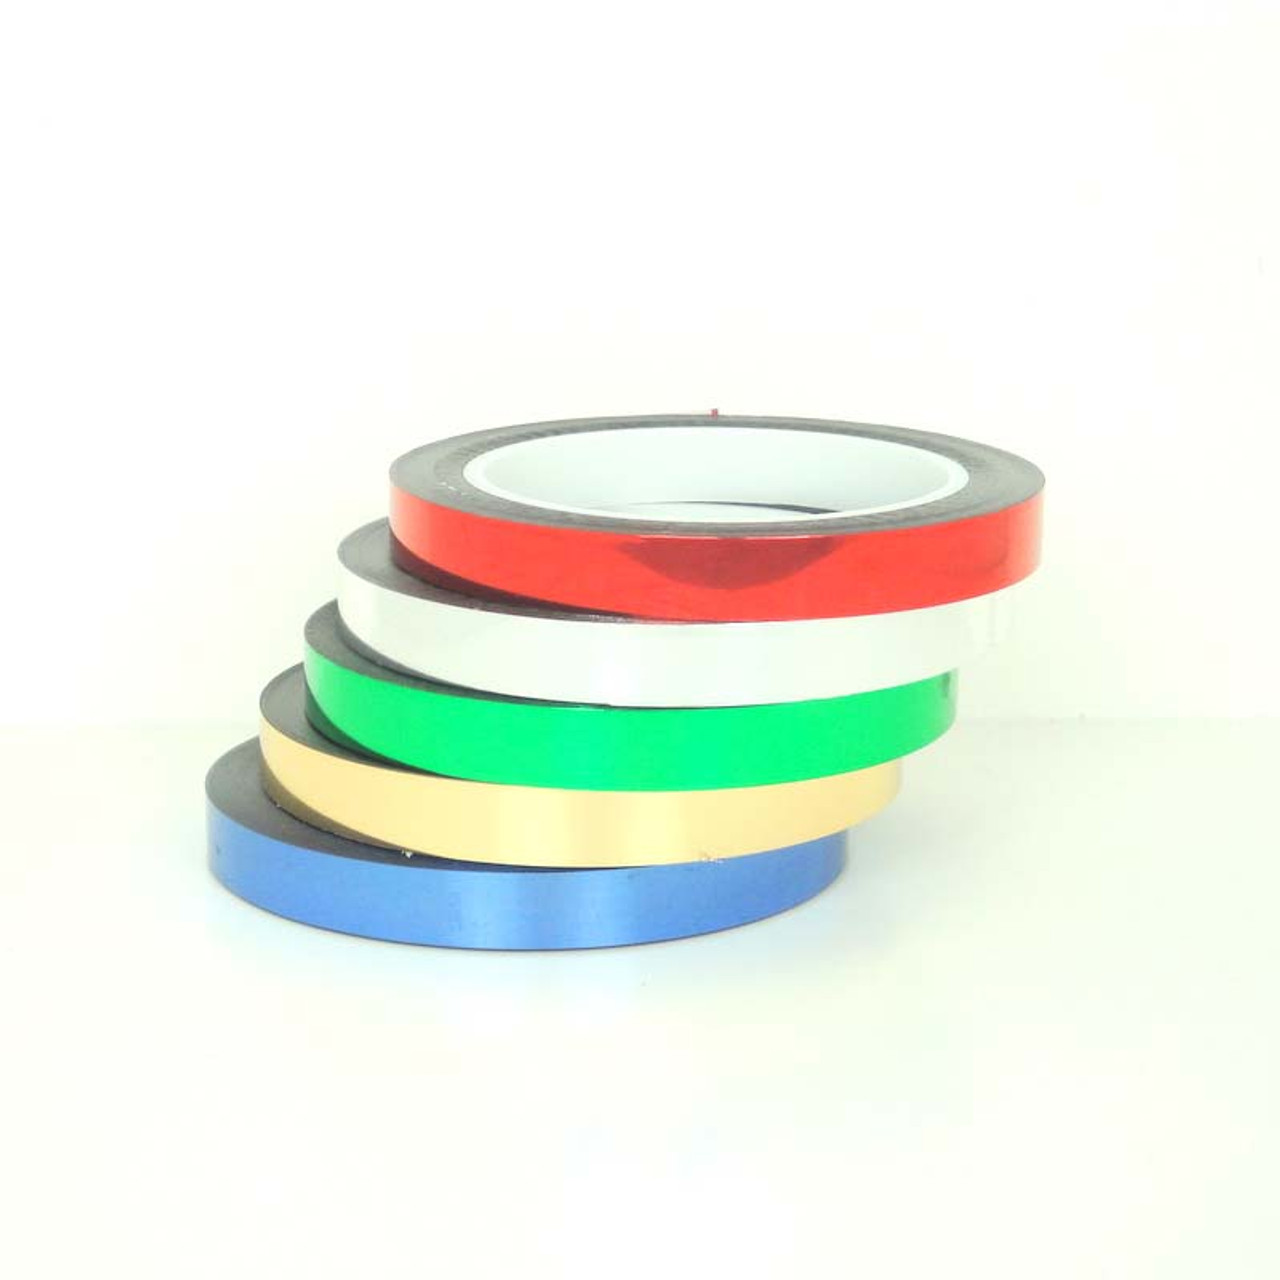 Metalized Tape, Metalized Polyester Tape - Wholesale